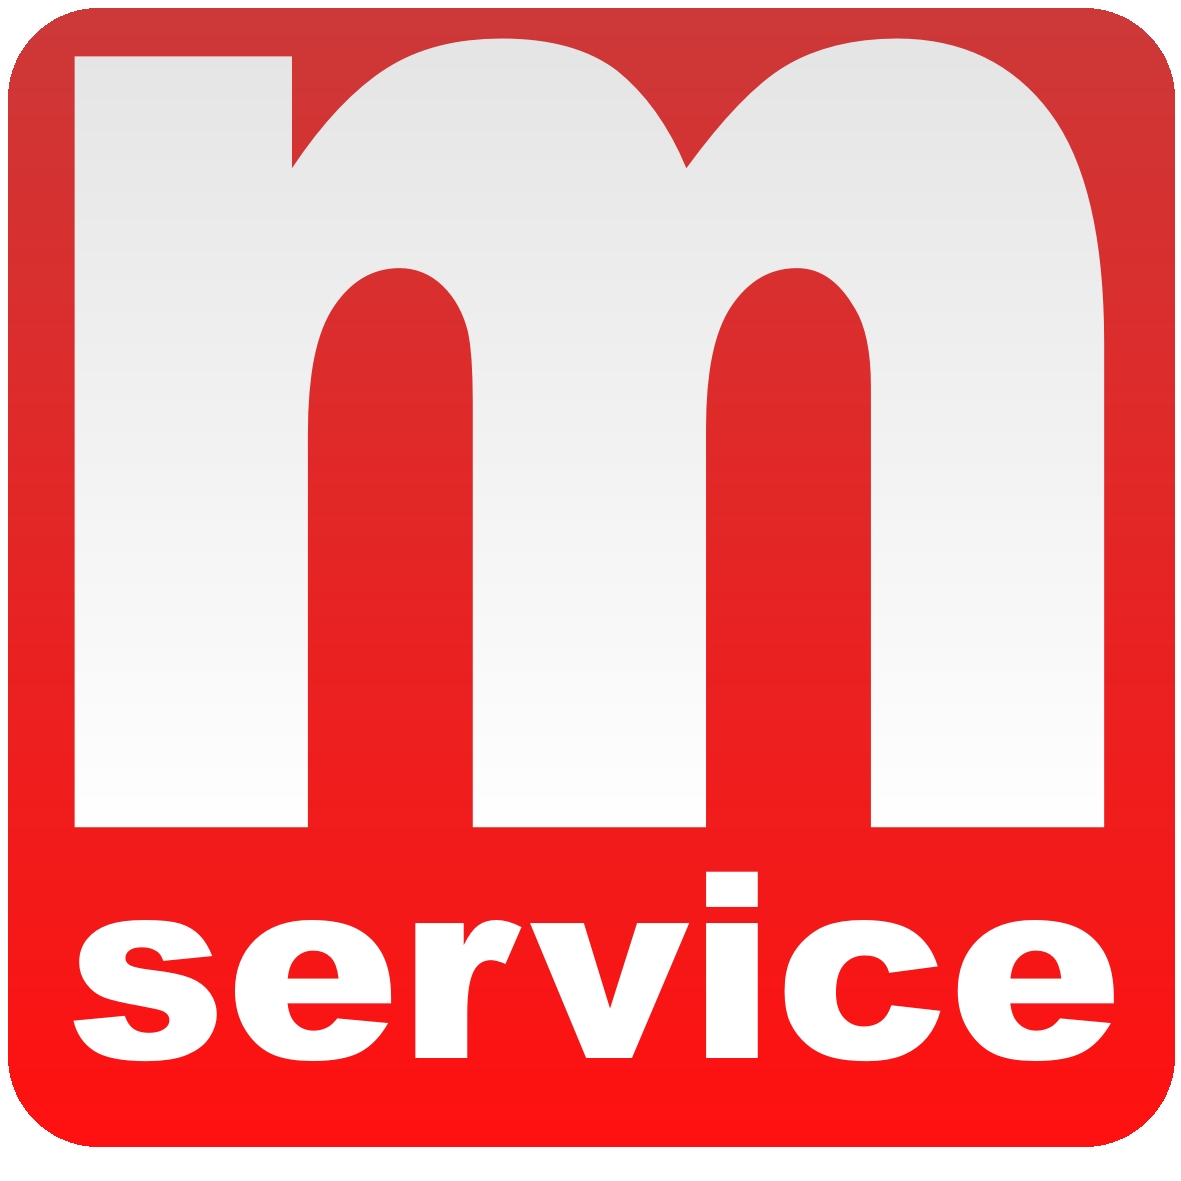 MSERVICE